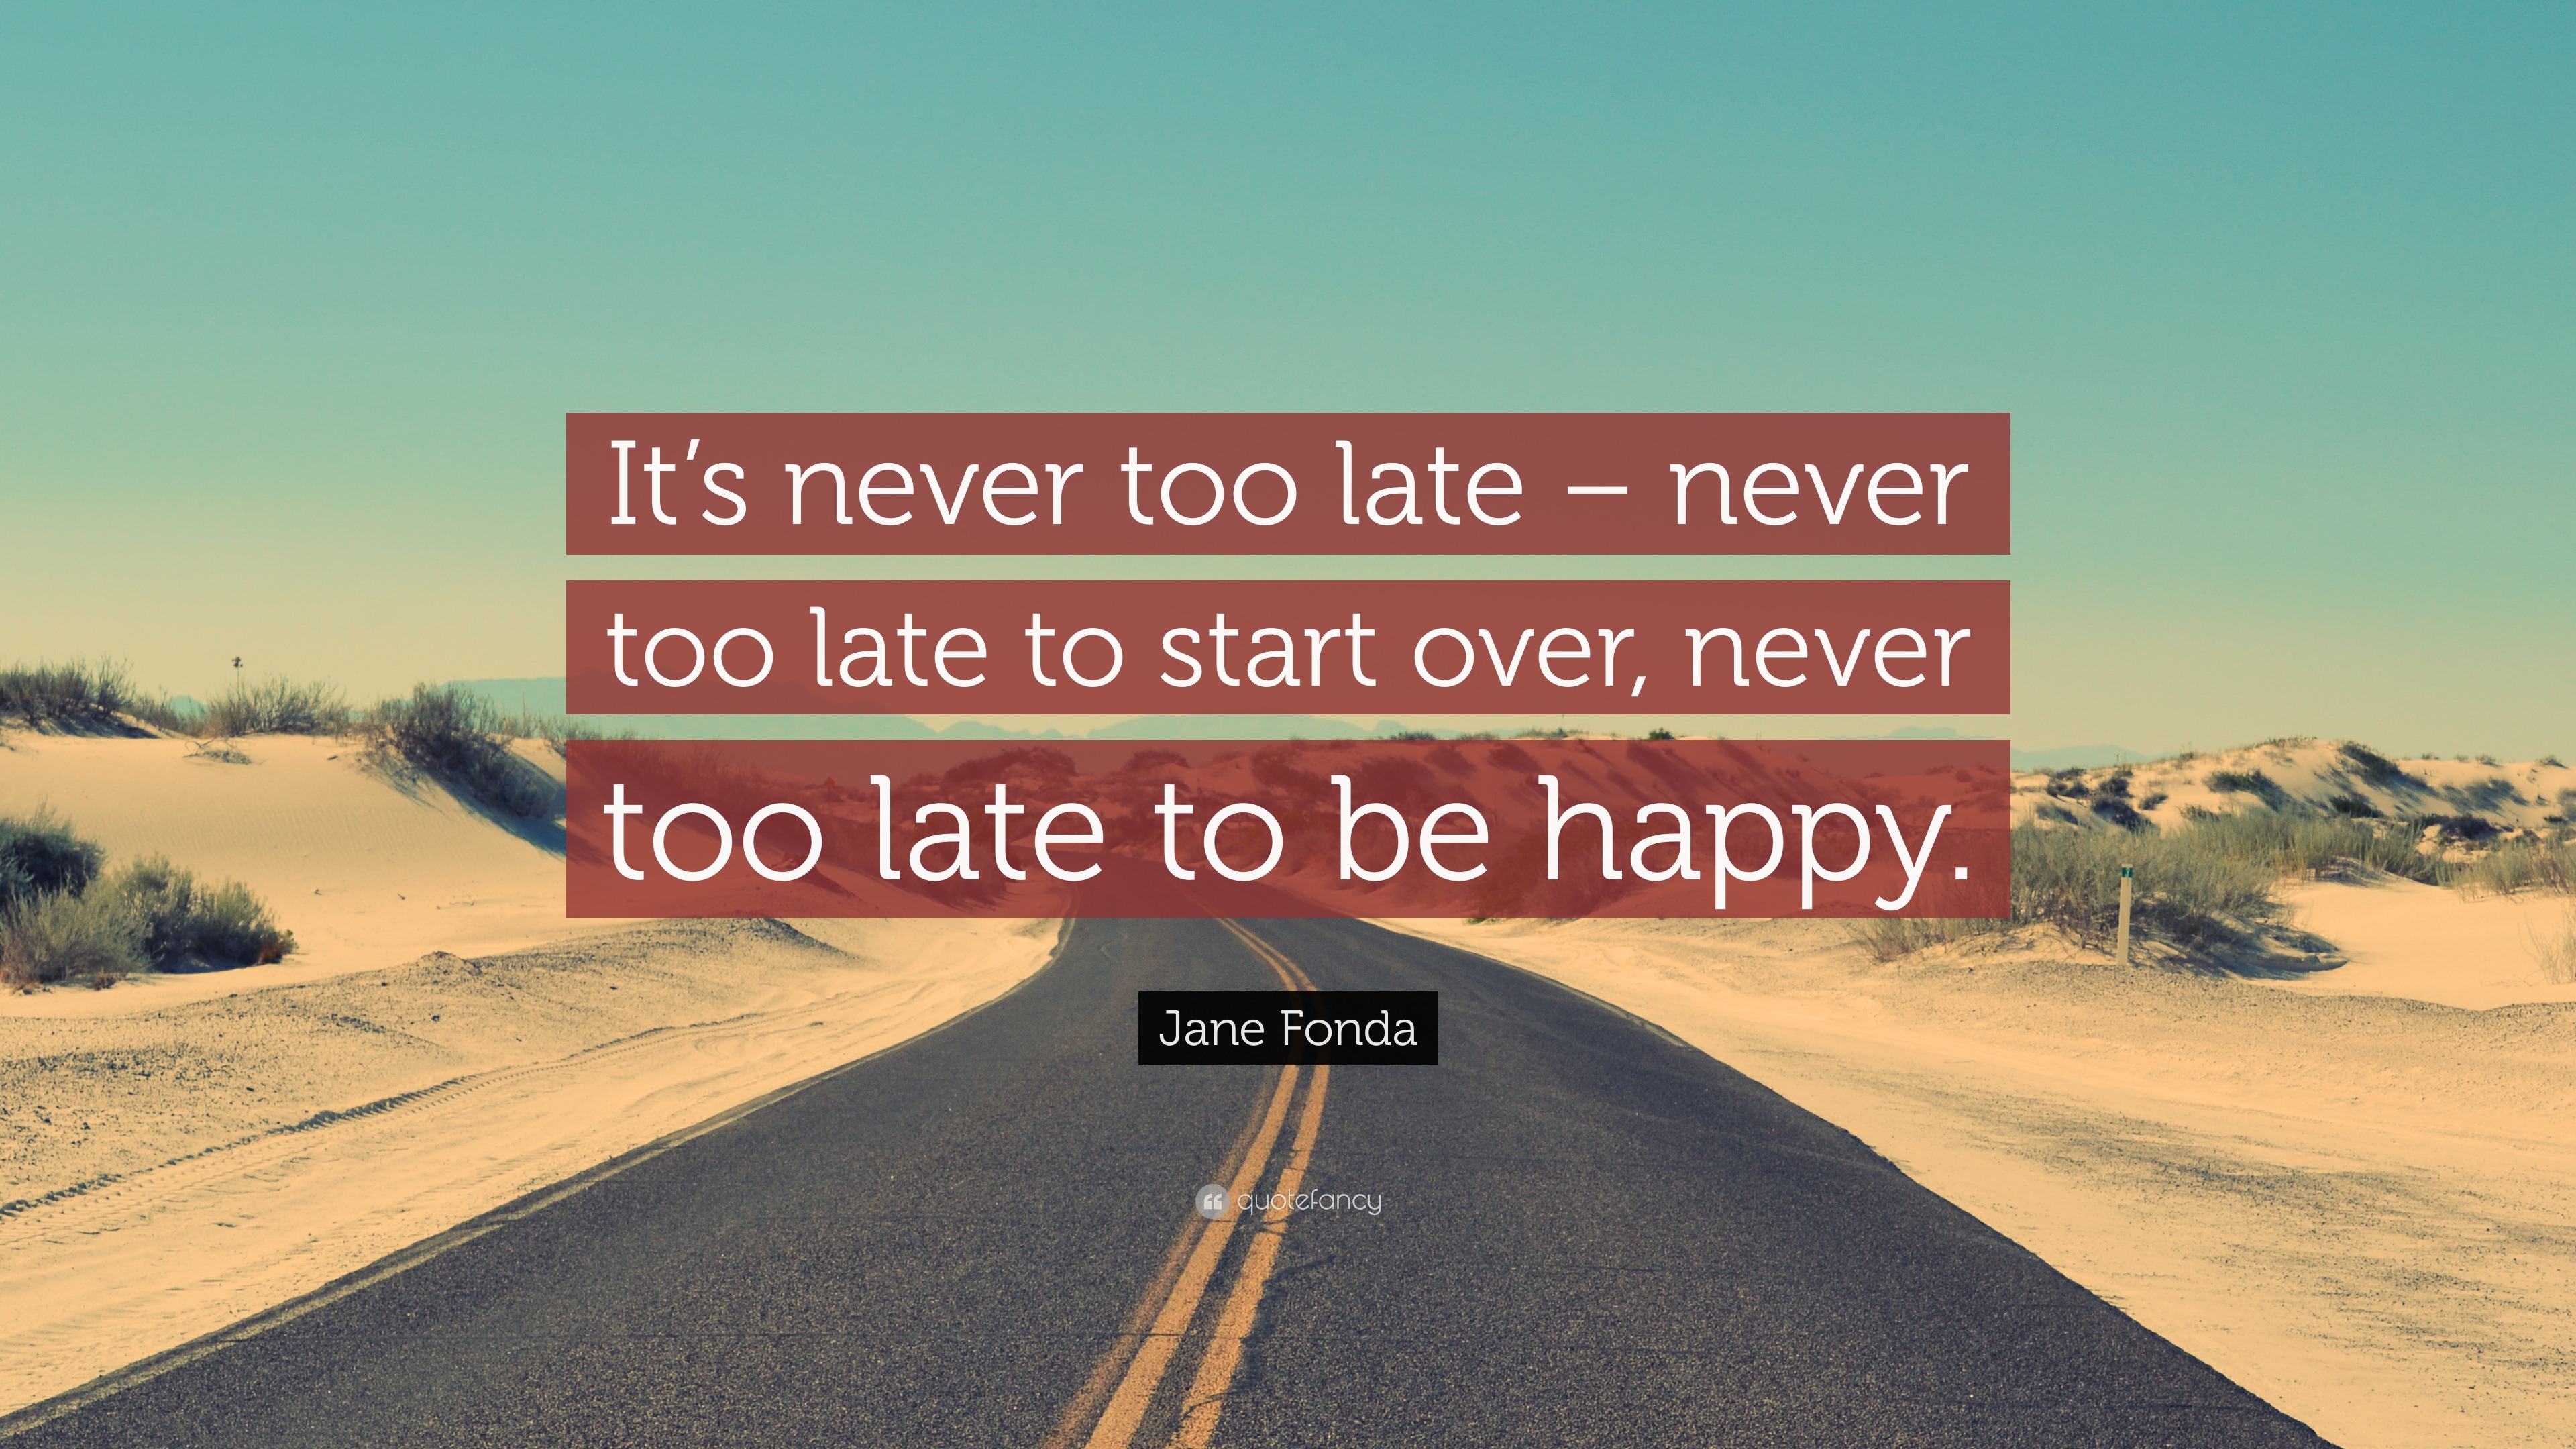 Jane Fonda Quote: “It’s never too late – never too late to start over